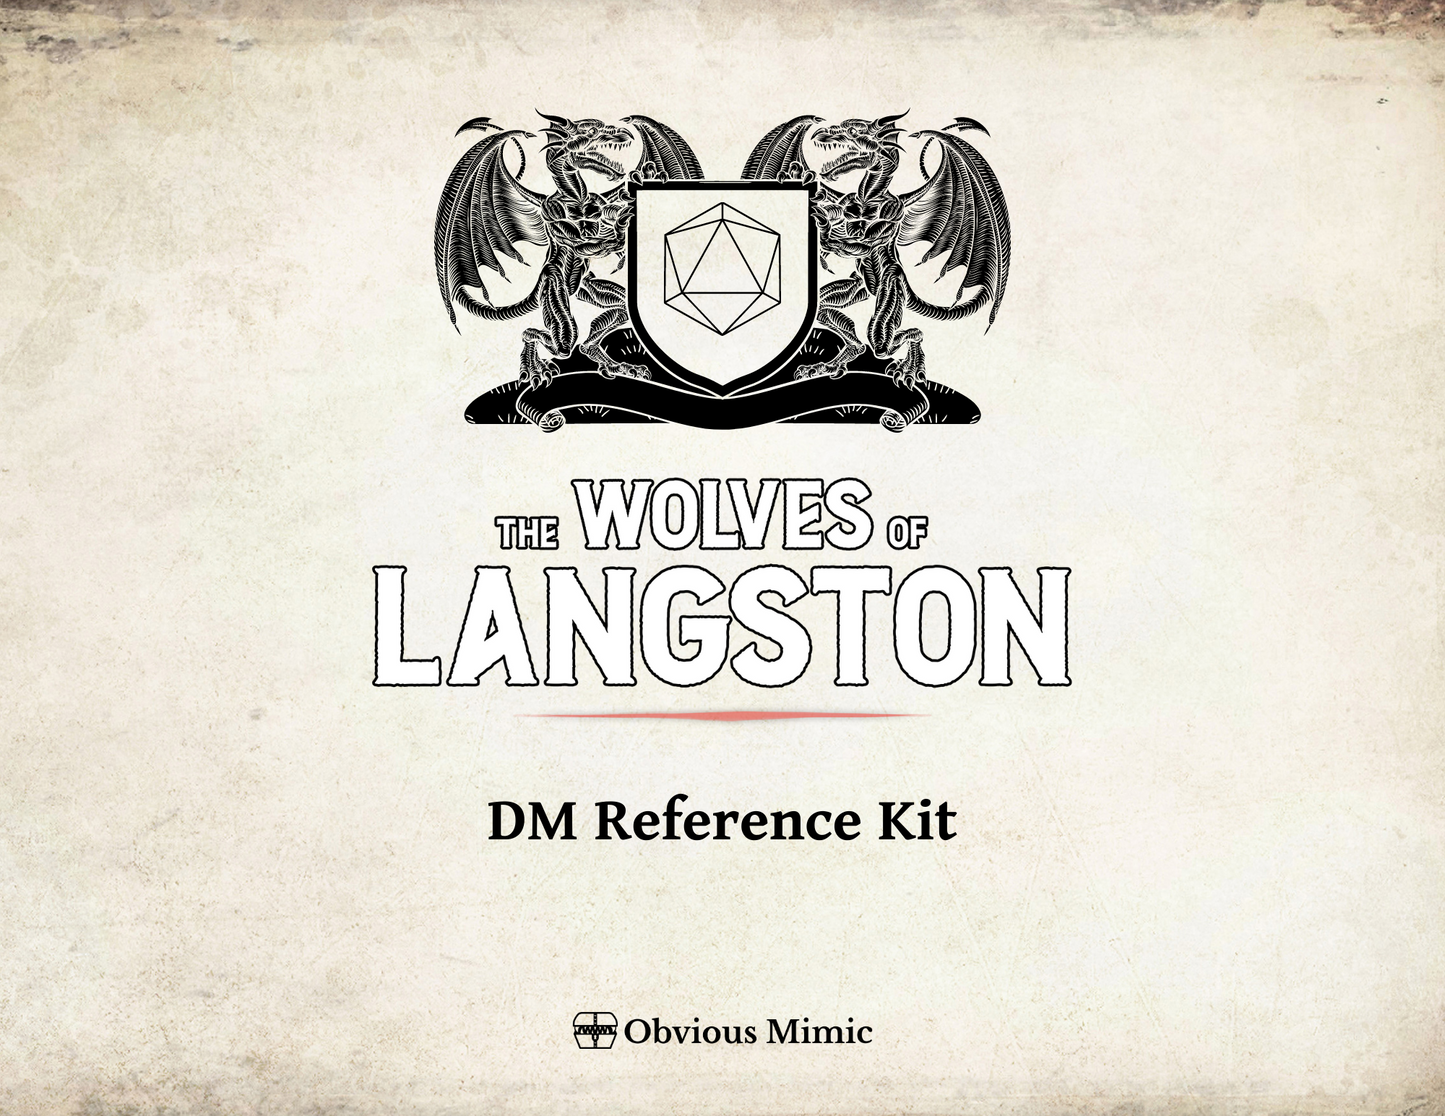 The Wolves of Langston - DM Reference Kit (FREE)